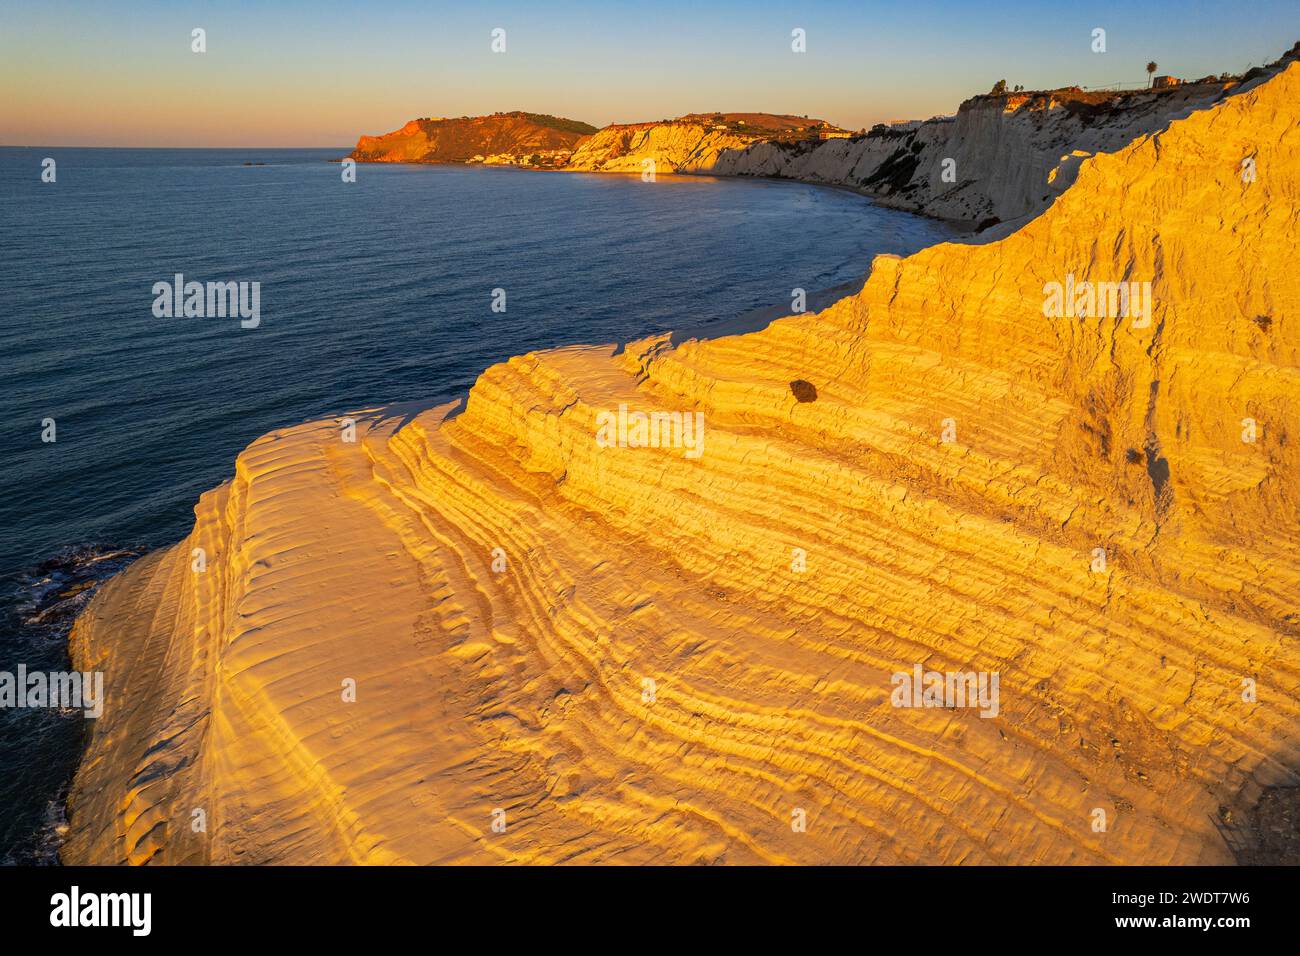 Aerial shot of Scala dei Turchi staircase seen from a drone at sunrise, Realmonte, Agrigento province, Sicily, Italy, Mediterranean, Europe Stock Photo